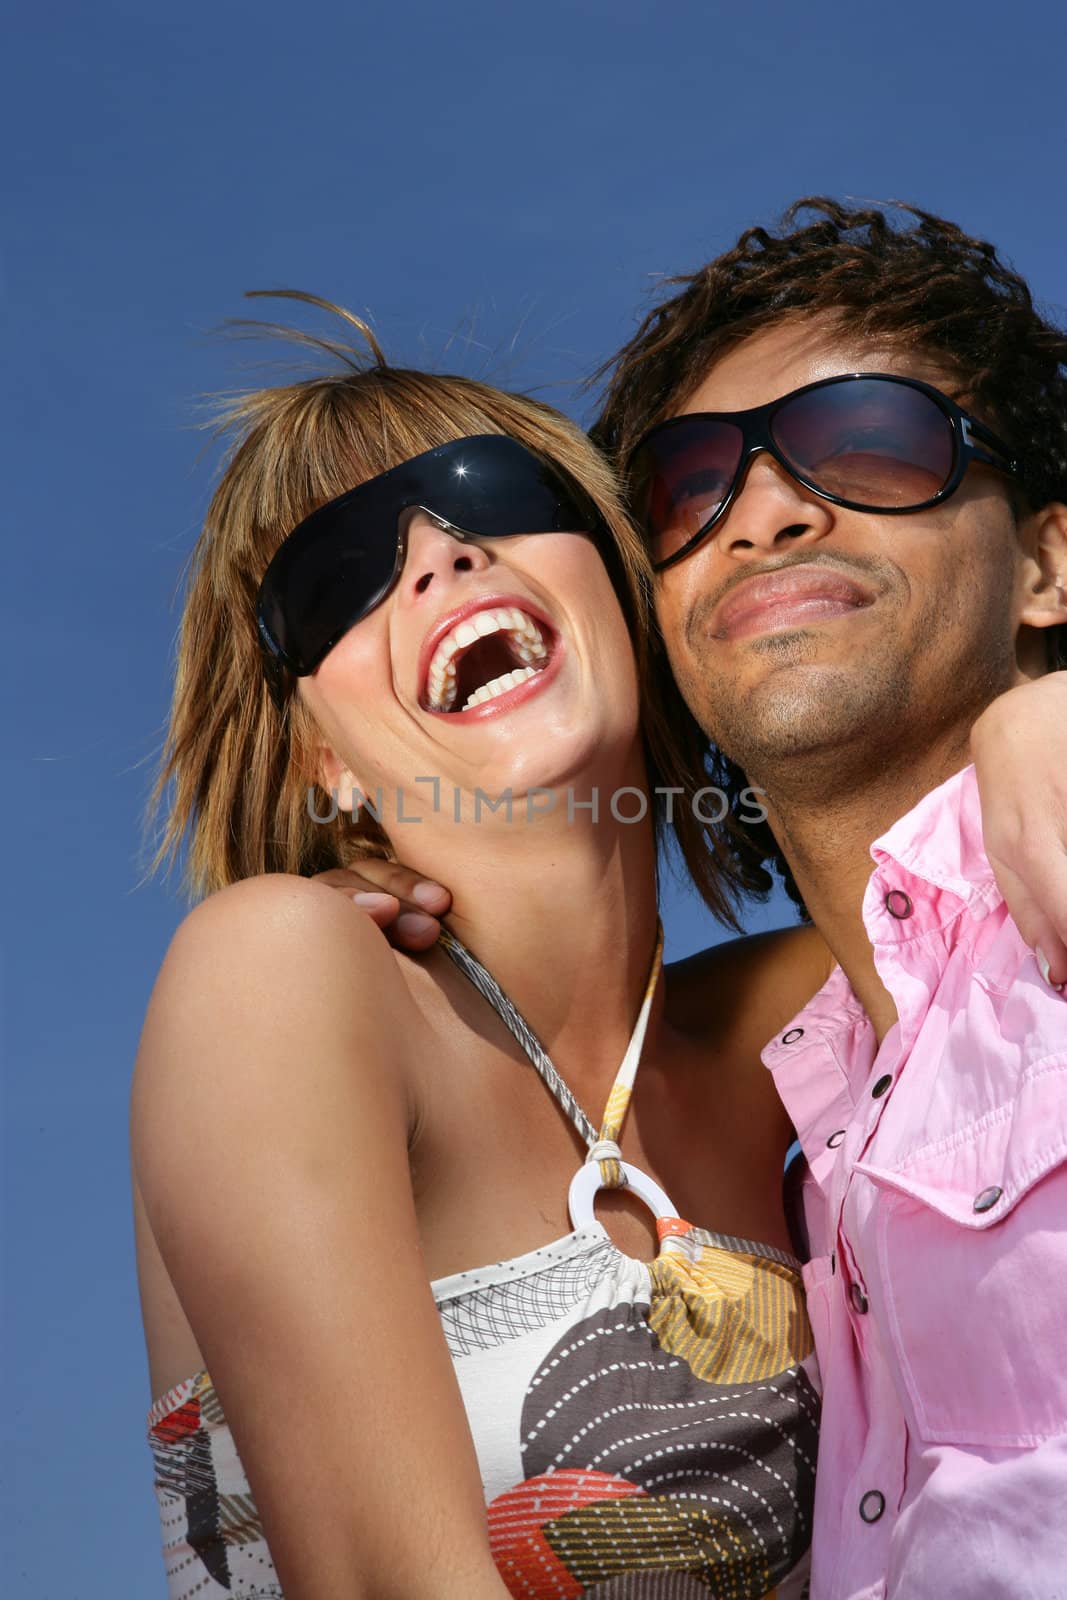 Couple laughing together in the sunshine by phovoir